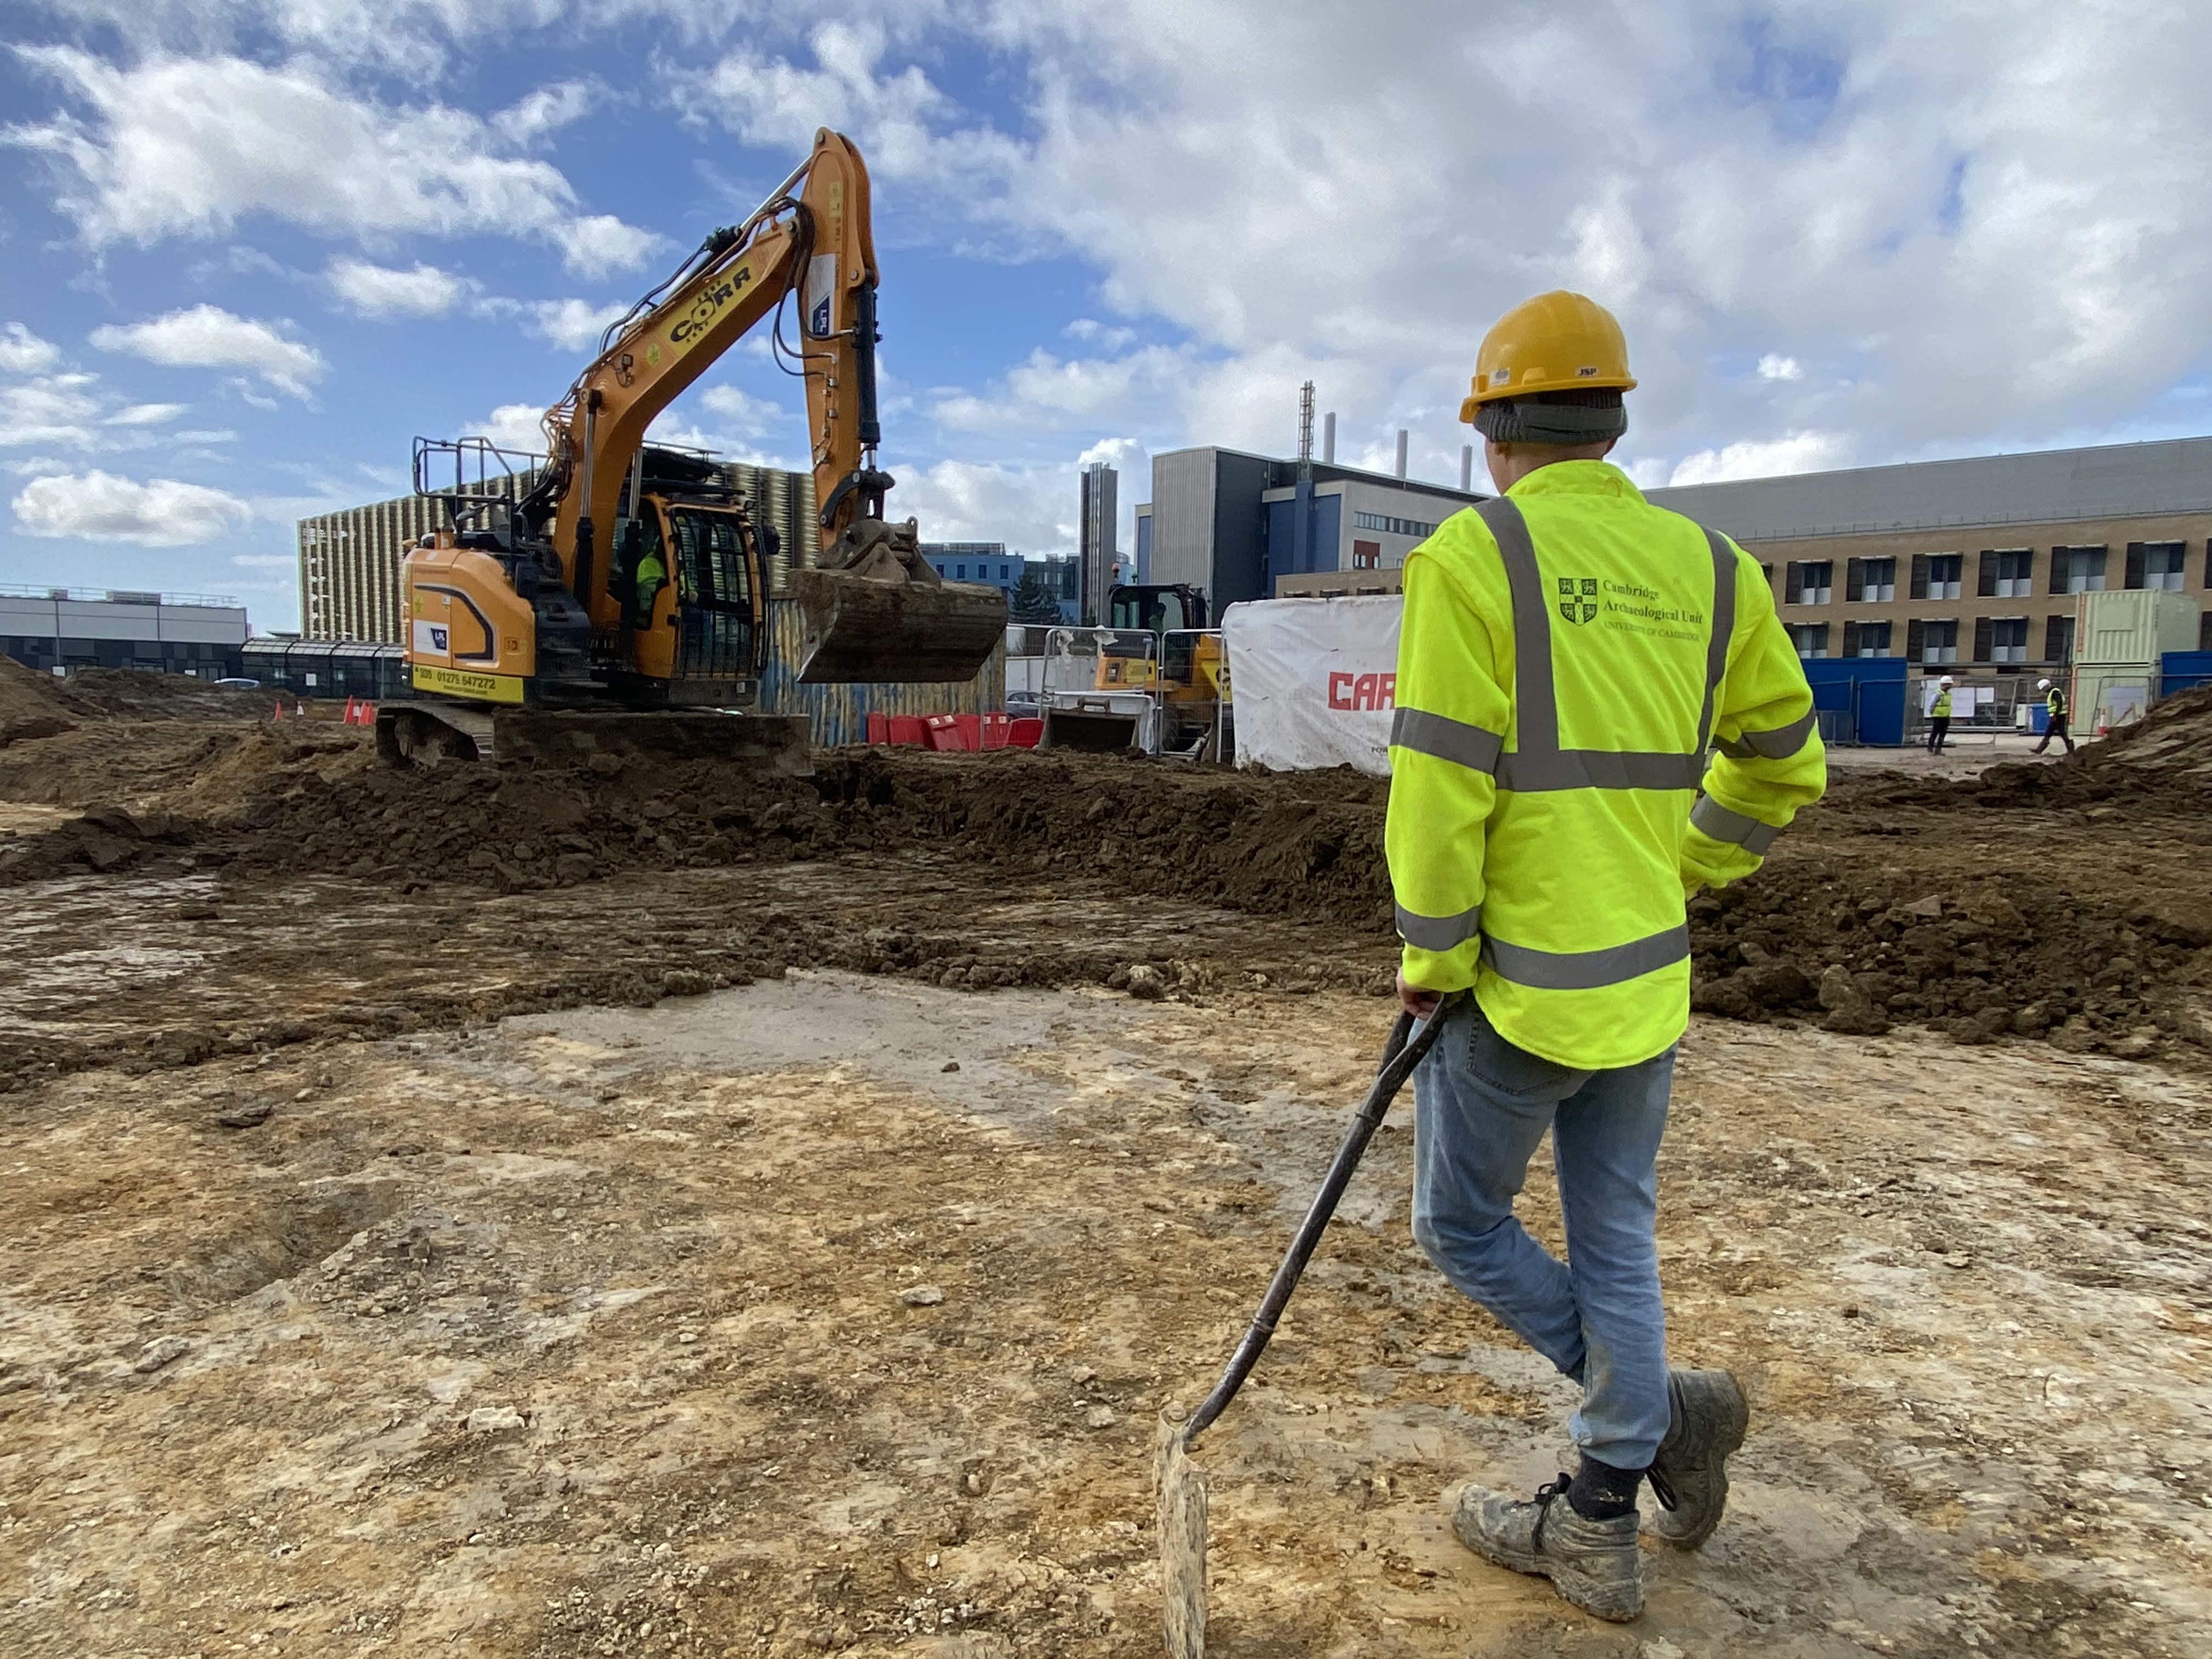 An archaeologist in a reflective jacket, hard hat and jeans stands with a shovel looking at a huge digger excavating the mud on the Cambridge Children's Hospital site.